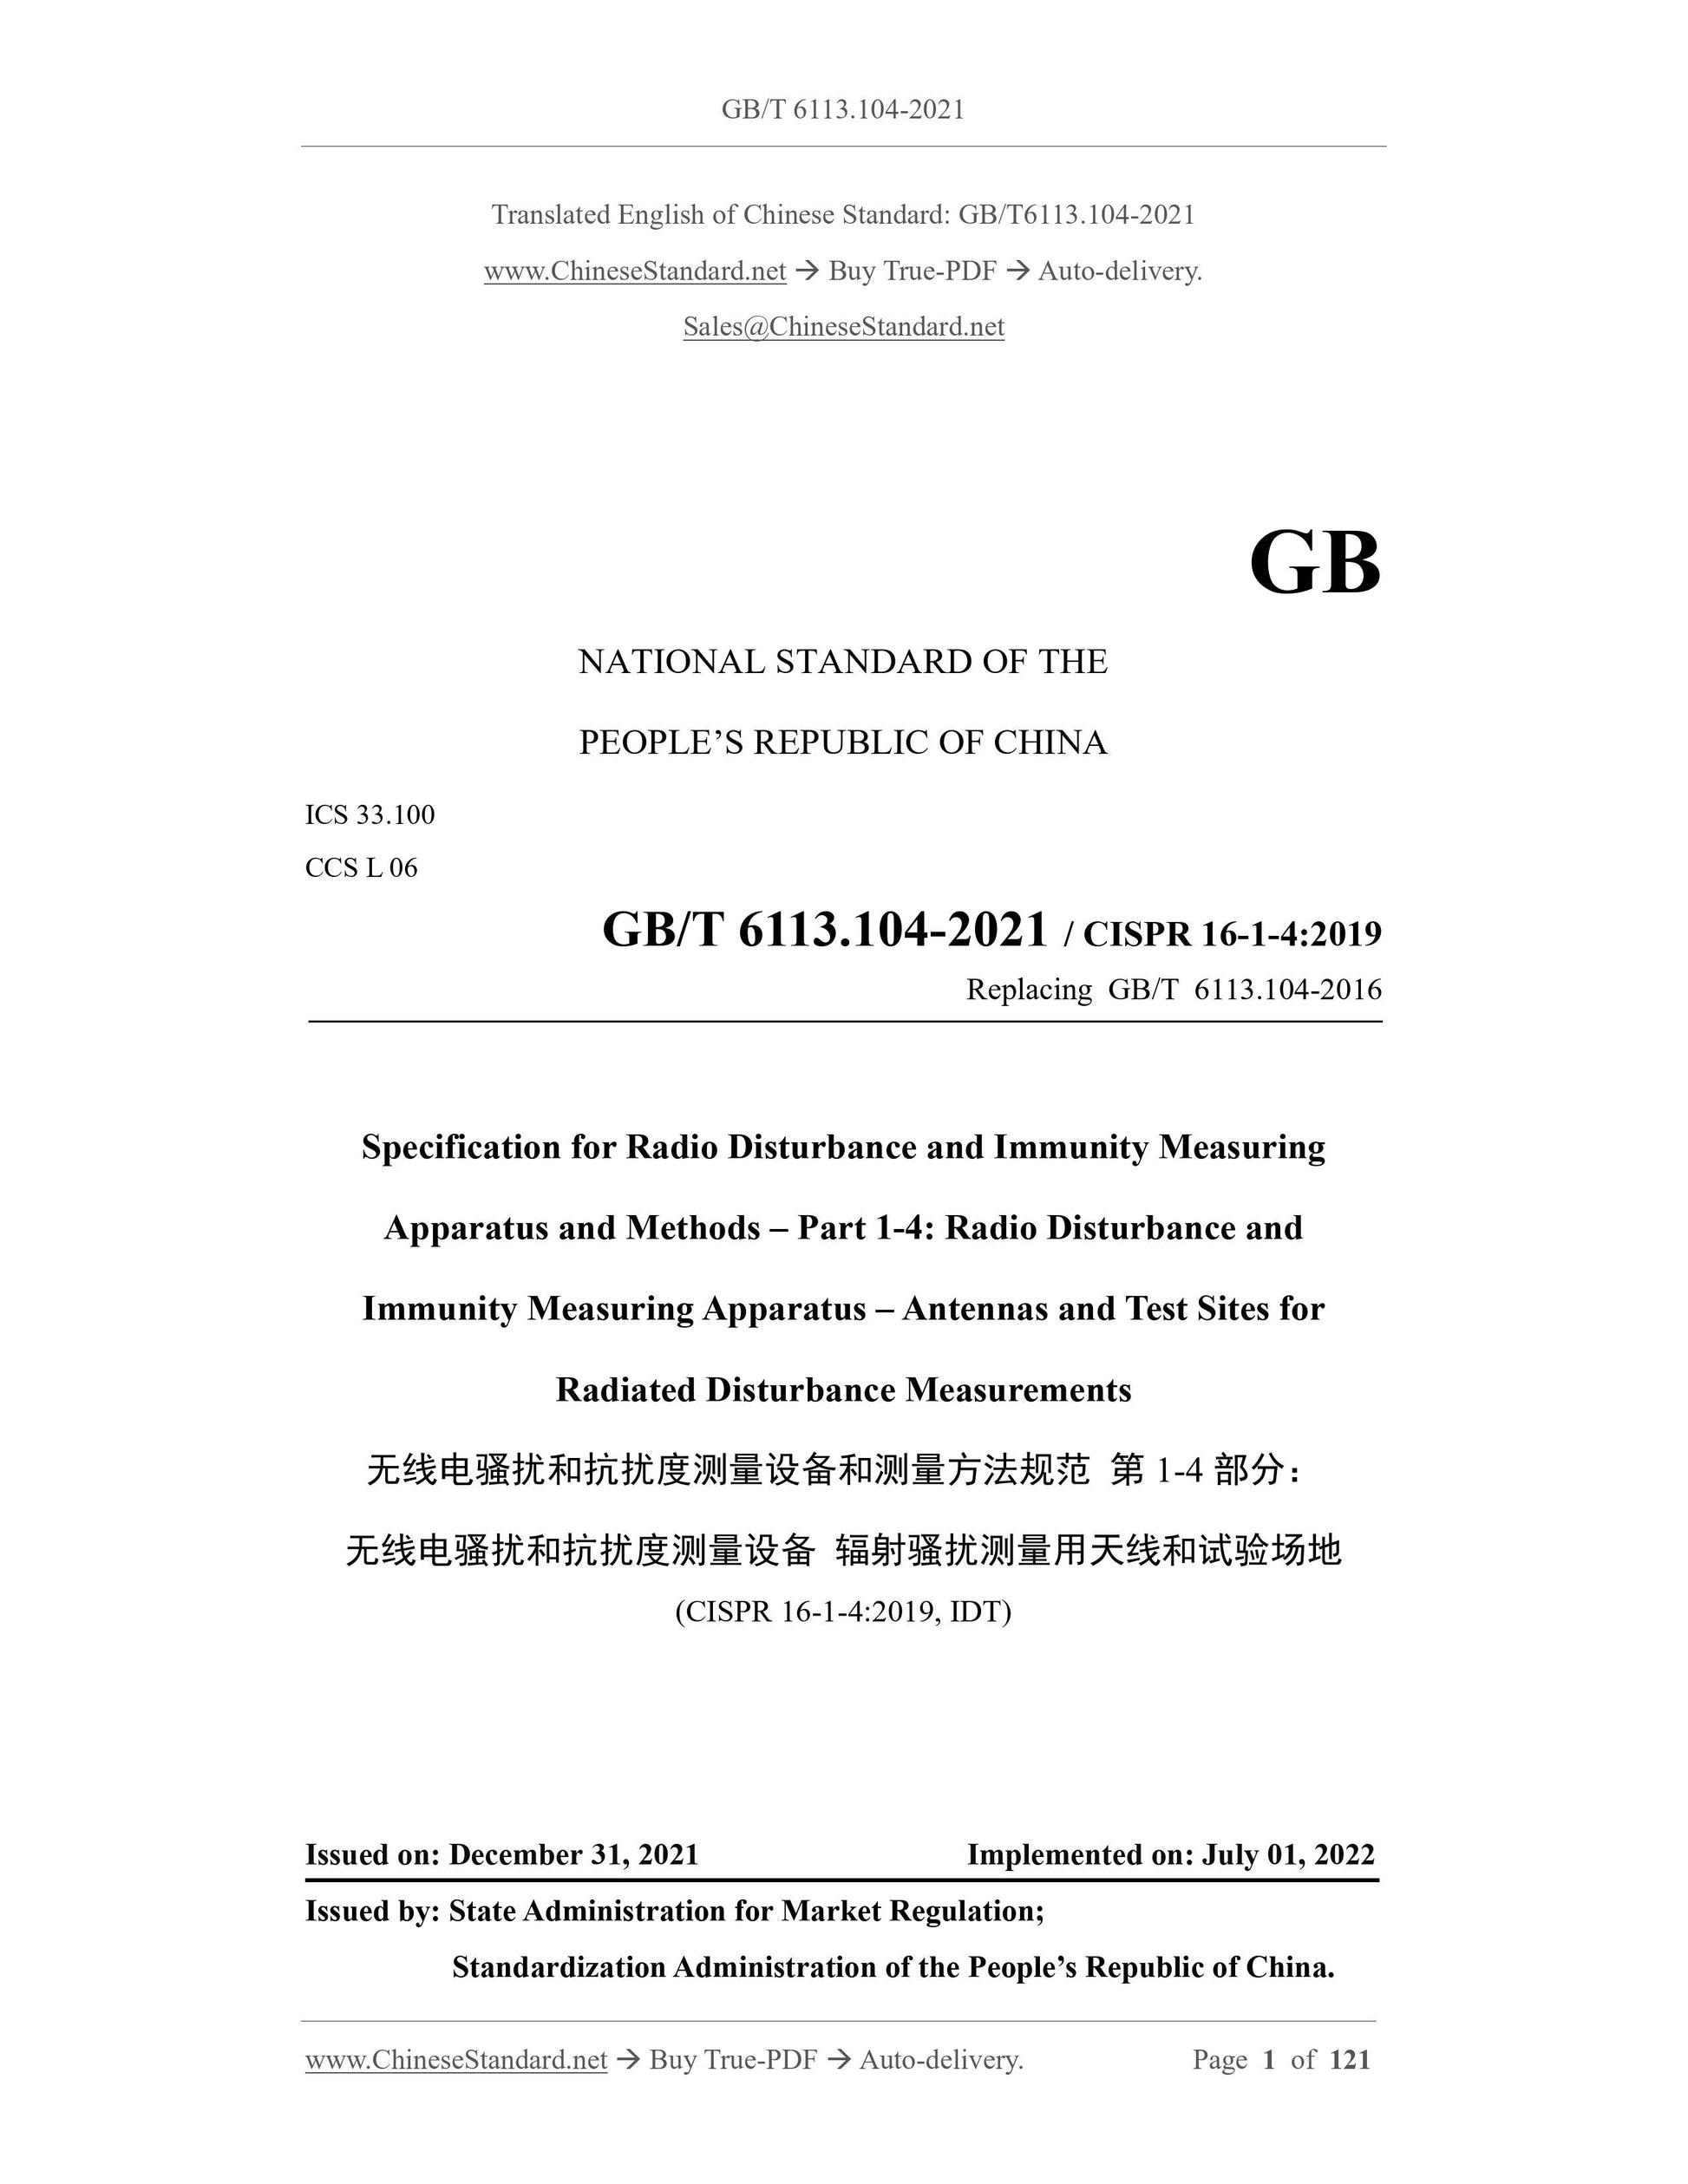 GB/T 6113.104-2021 Page 1